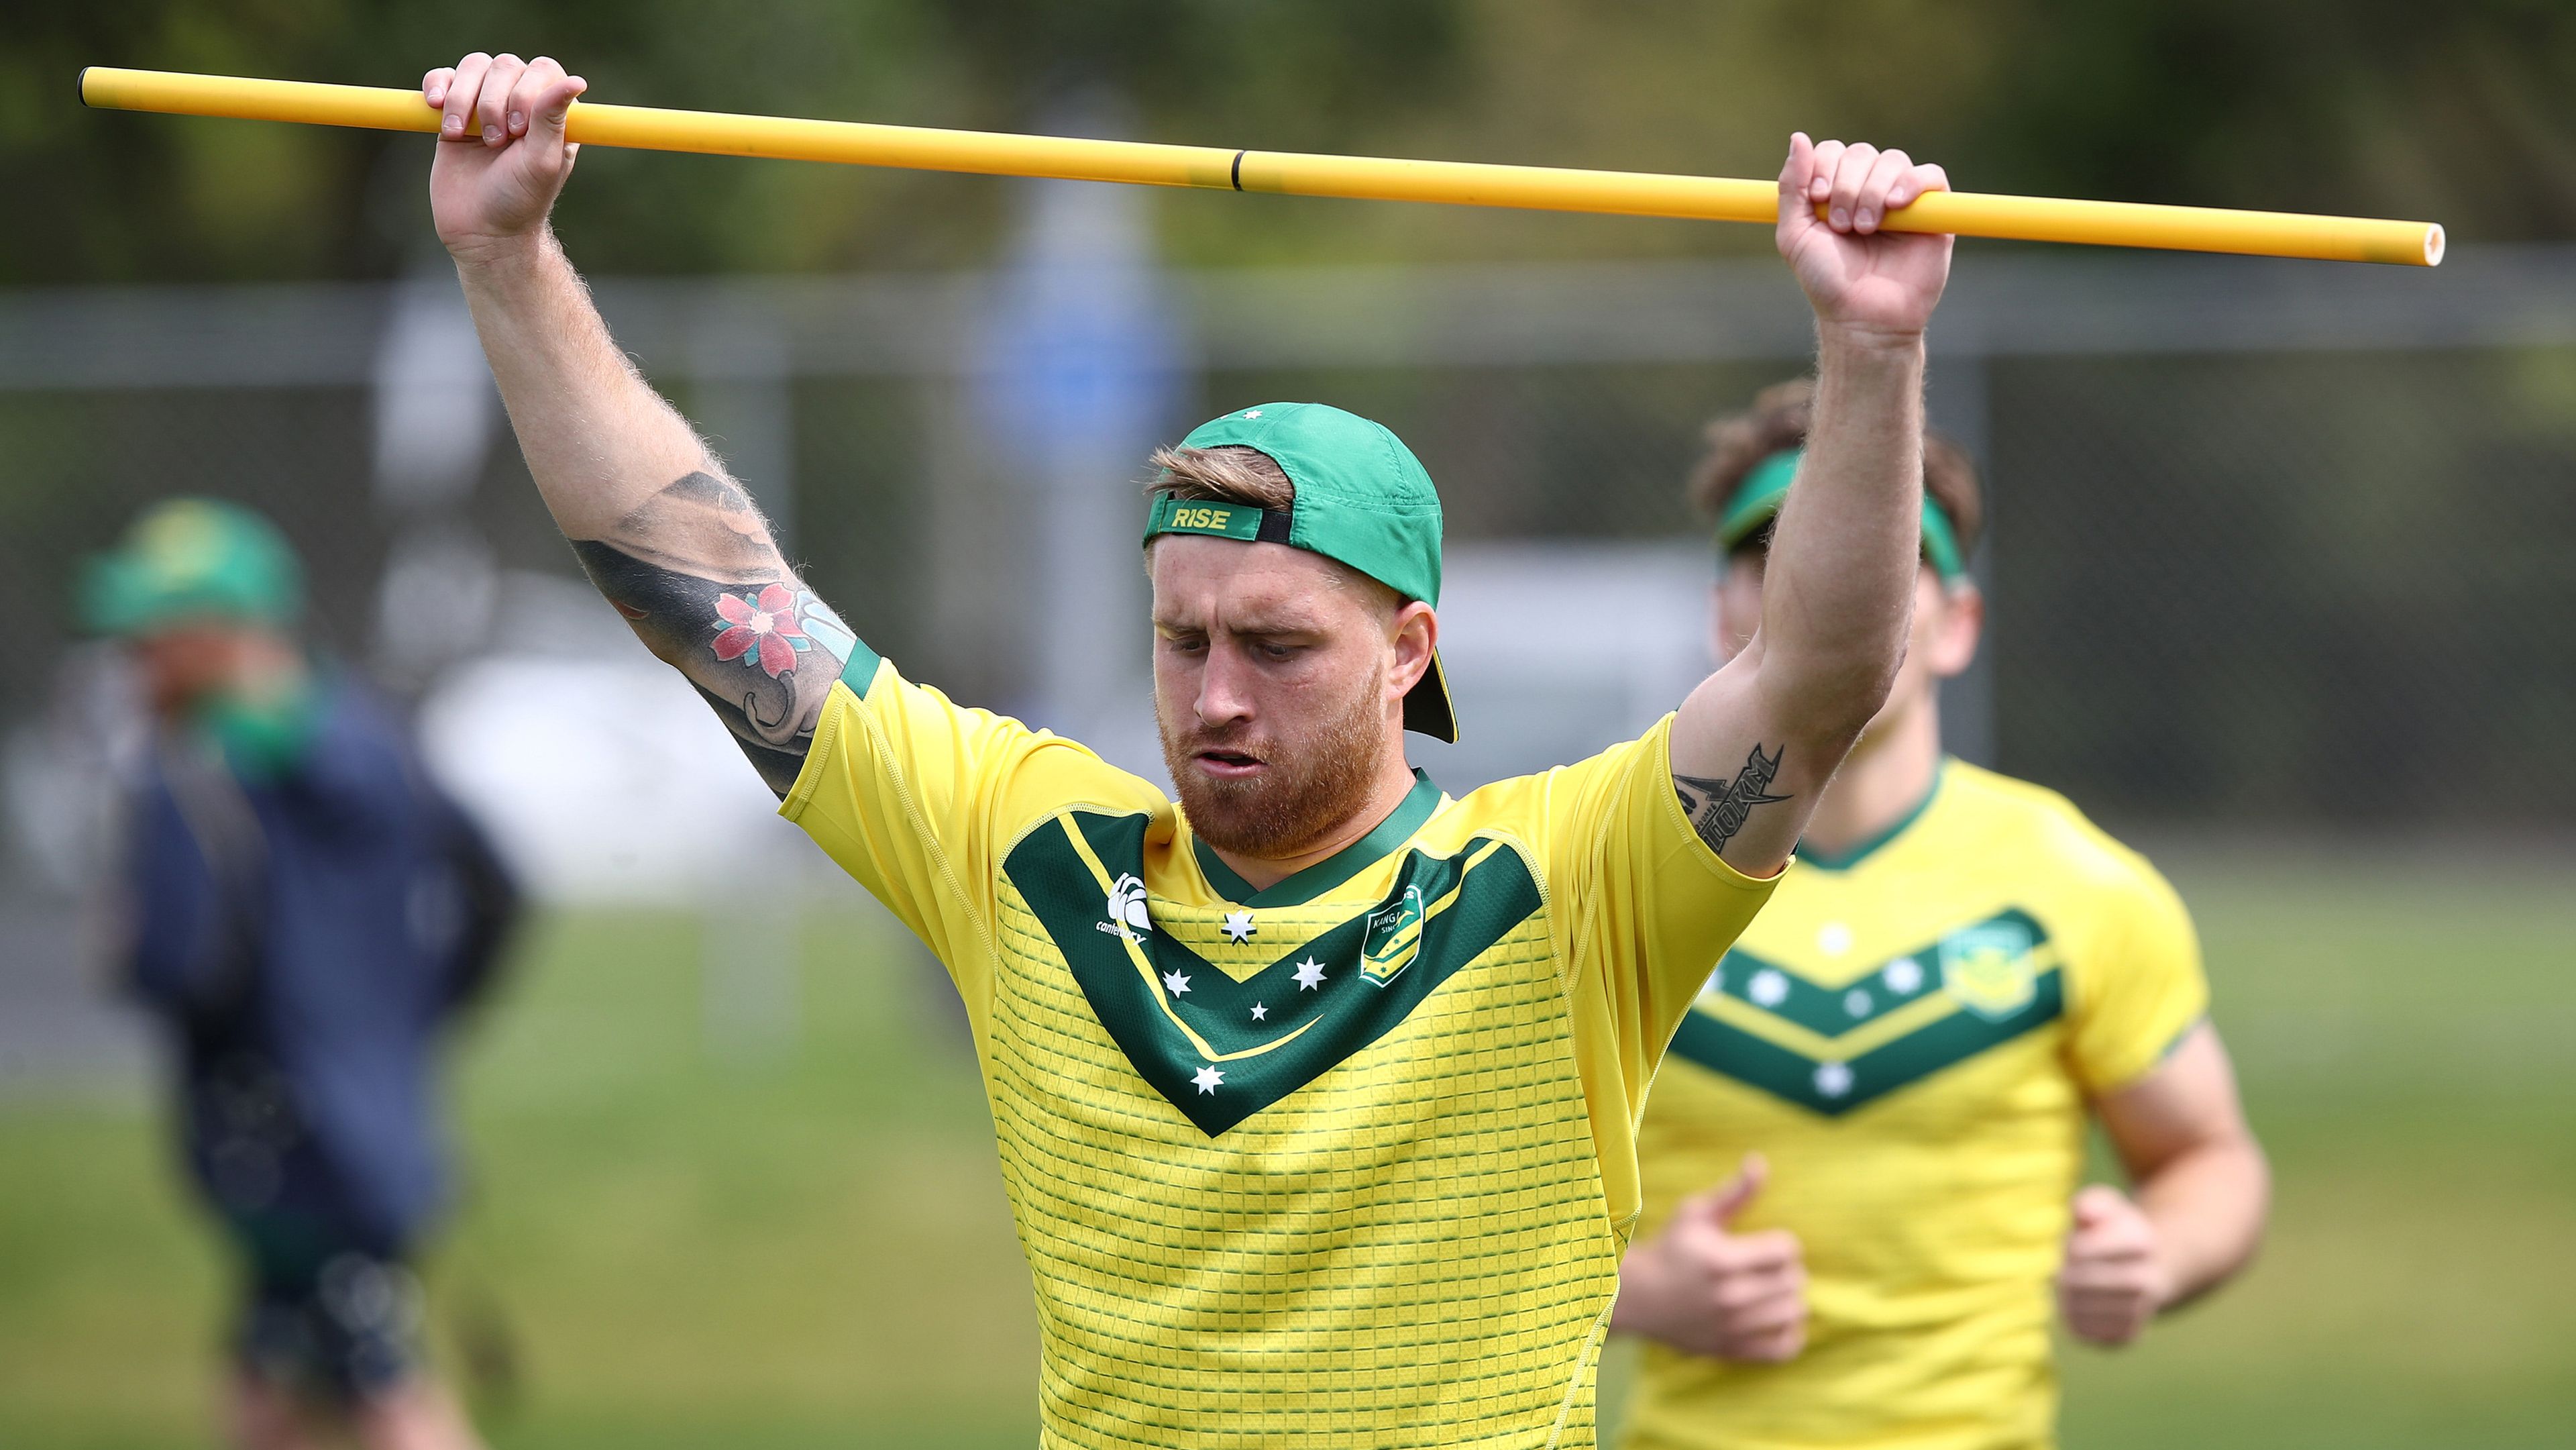 AUCKLAND, NEW ZEALAND - OCTOBER 29: Cameron Munster warms up during an Australia Kangaroos Rugby League training session at QBE Stadium on October 29, 2019 in Auckland, New Zealand. (Photo by Phil Walter/Getty Images)